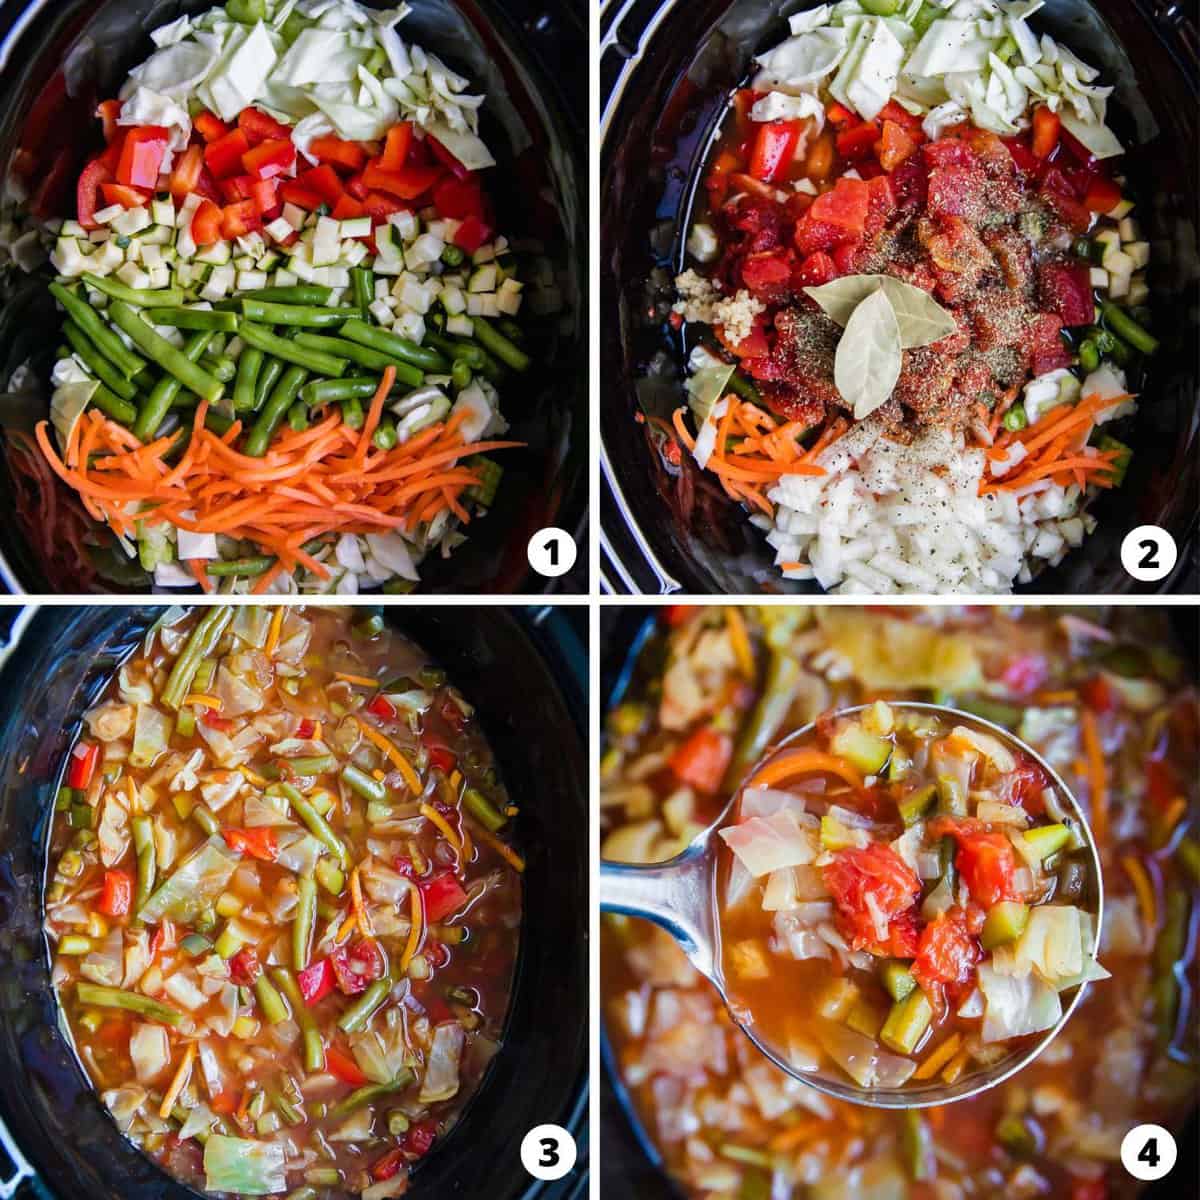 Showing how to make cabbage soup in a 4 step collage.